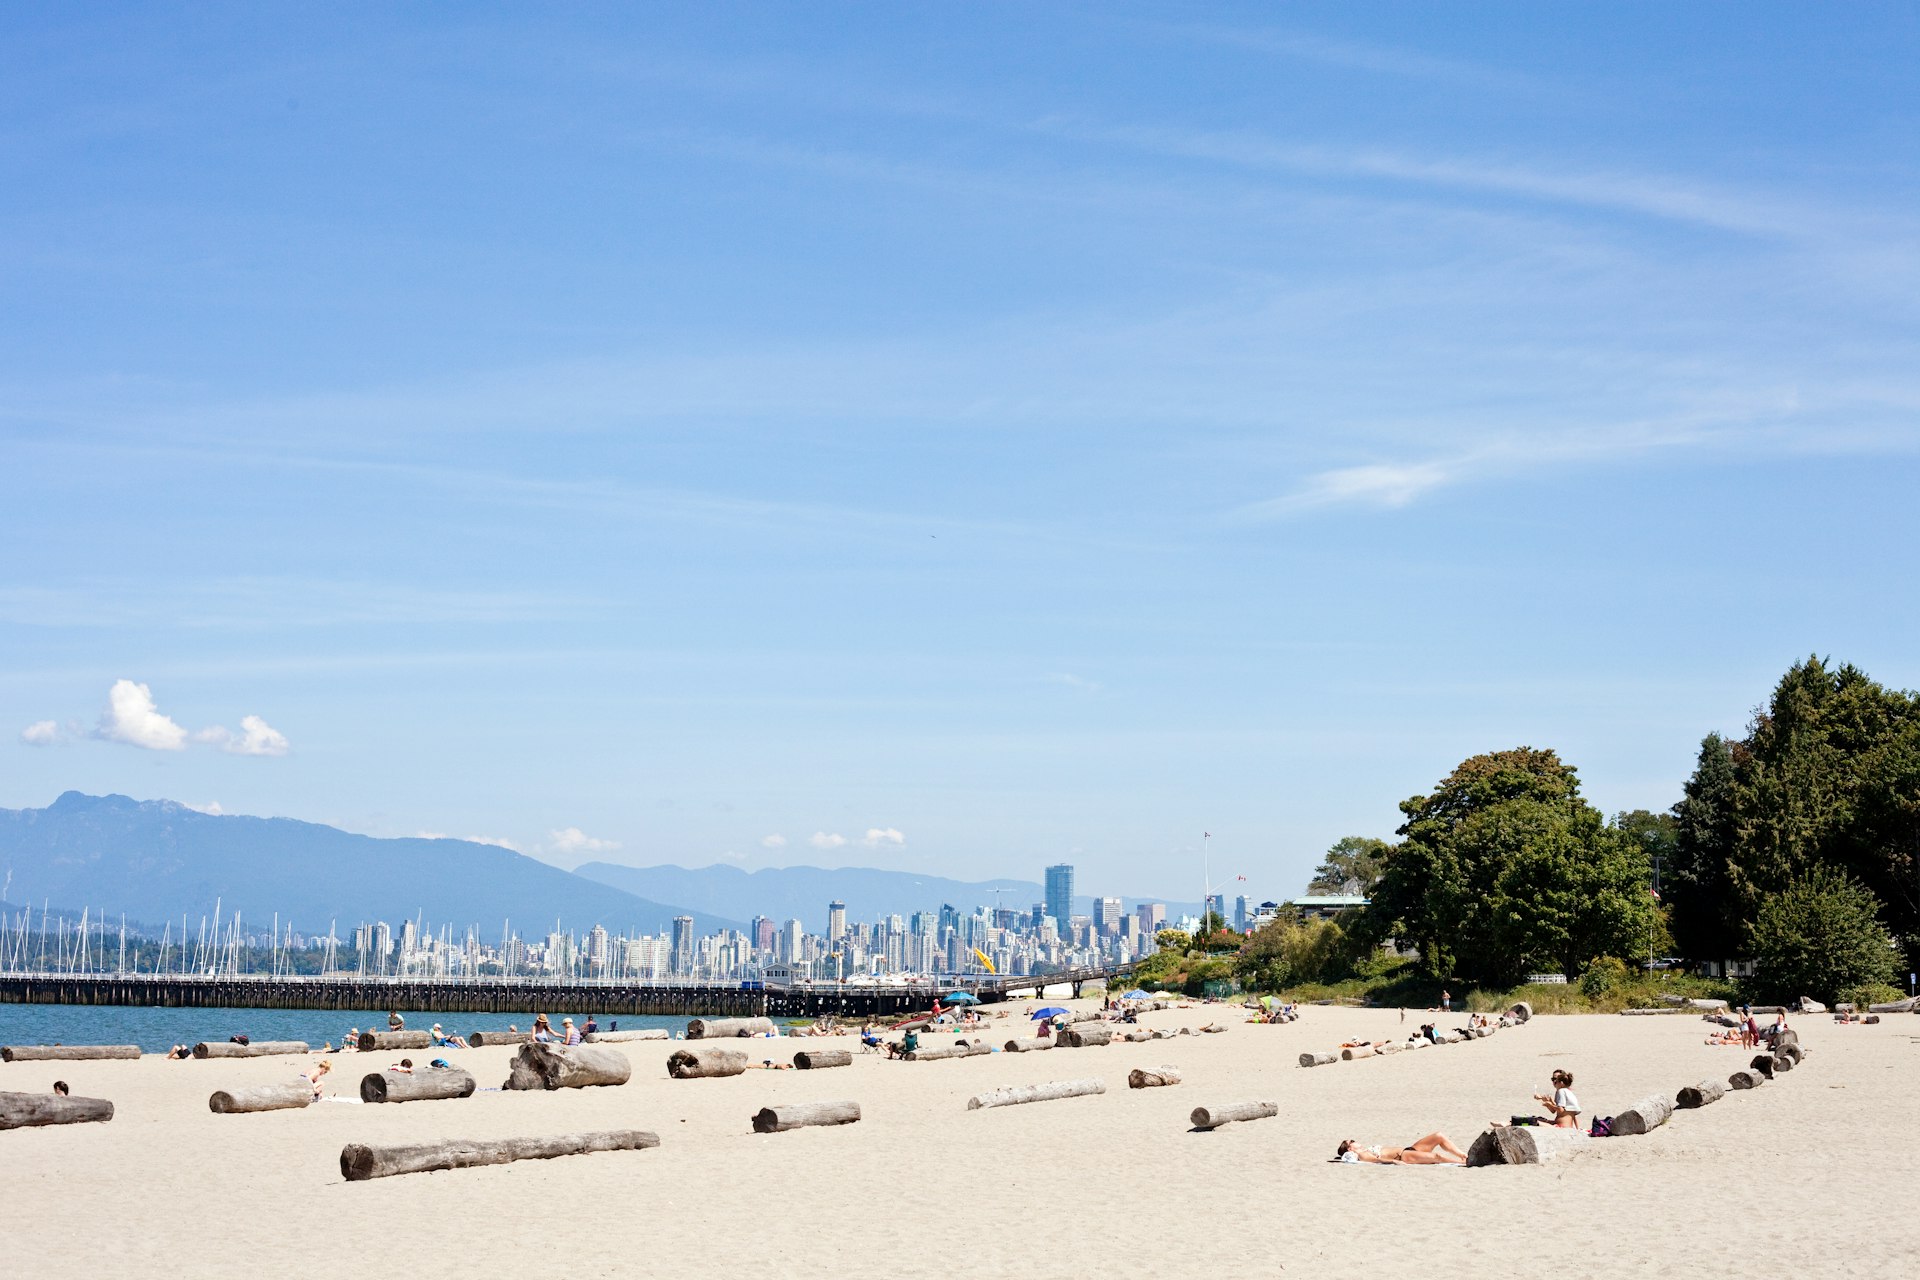  A summer day on Jericho Beach in Kitsilano. People are spread out on the beach with the city of Vancouver in the background